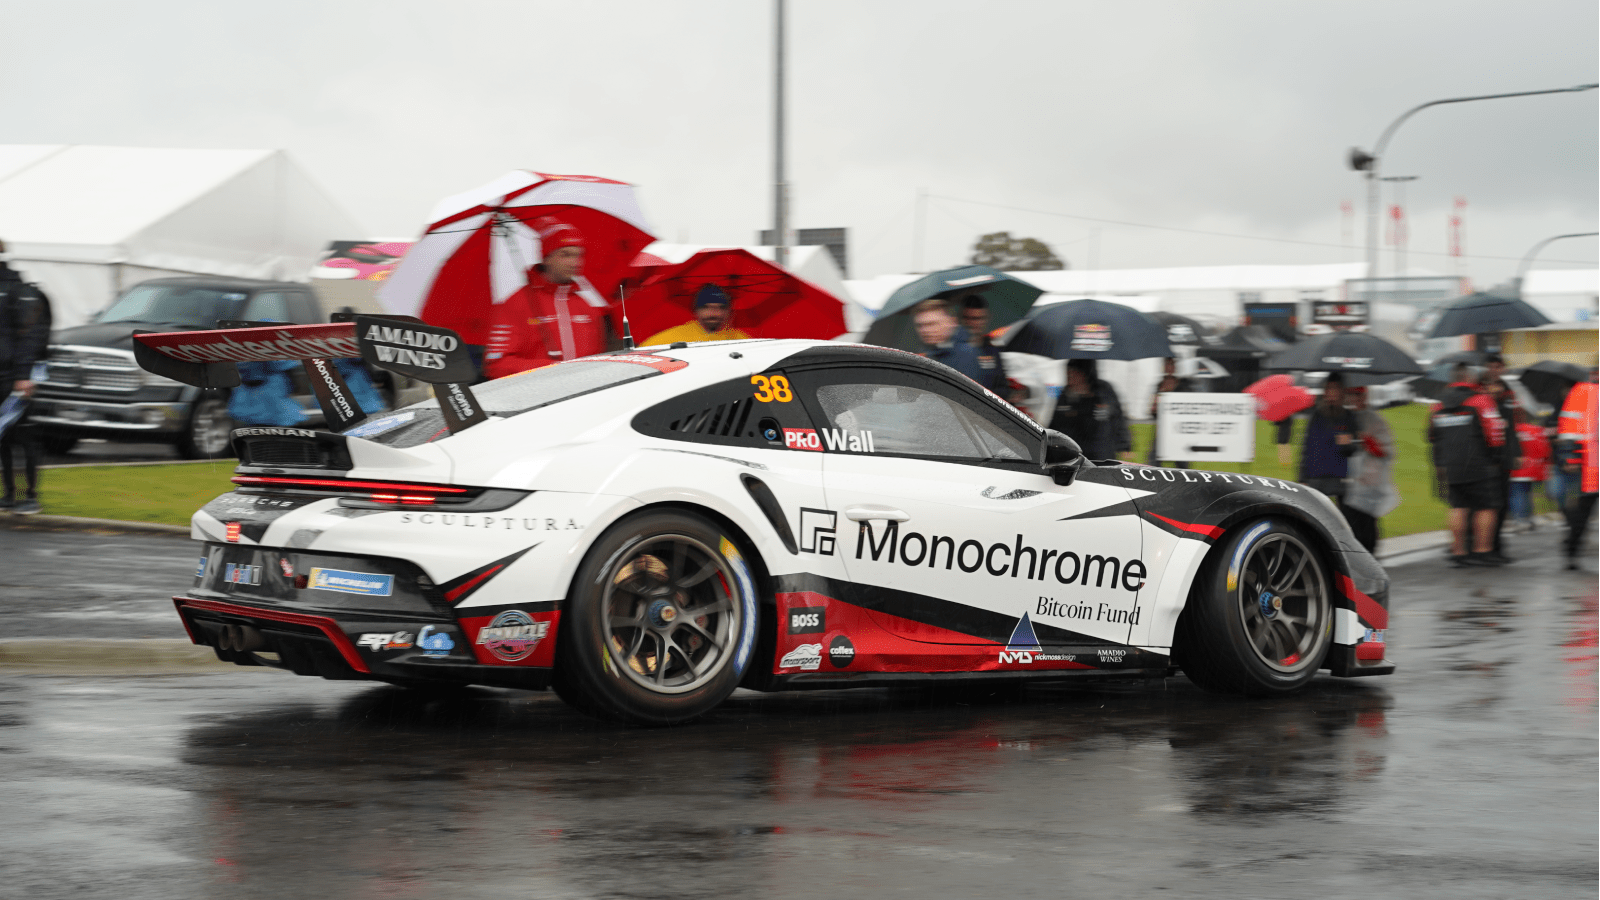 Monochrome_Supercars_Official Partnership-David Wall-Monochrome Livery.png